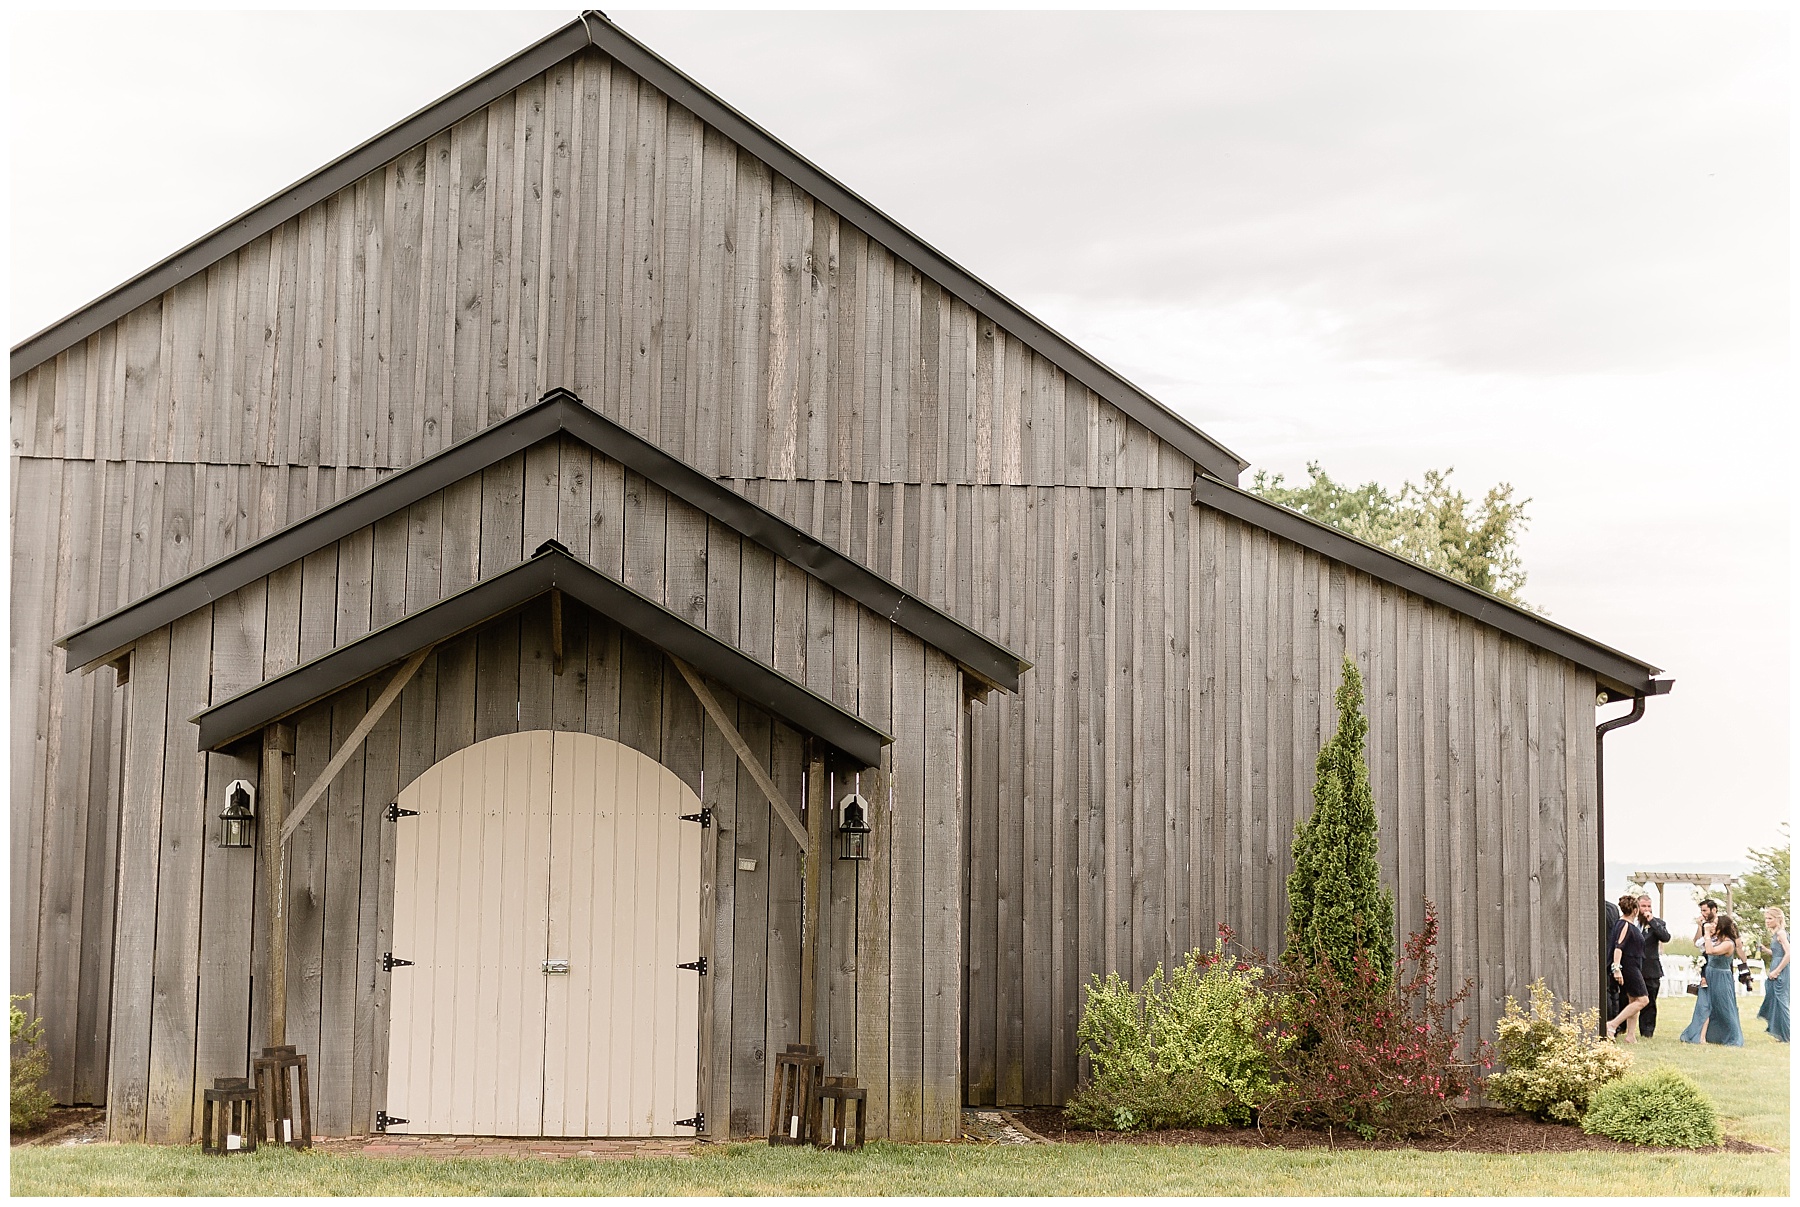 The barn at Cage Stables Maryland Wedding, Missy Freeman Photography